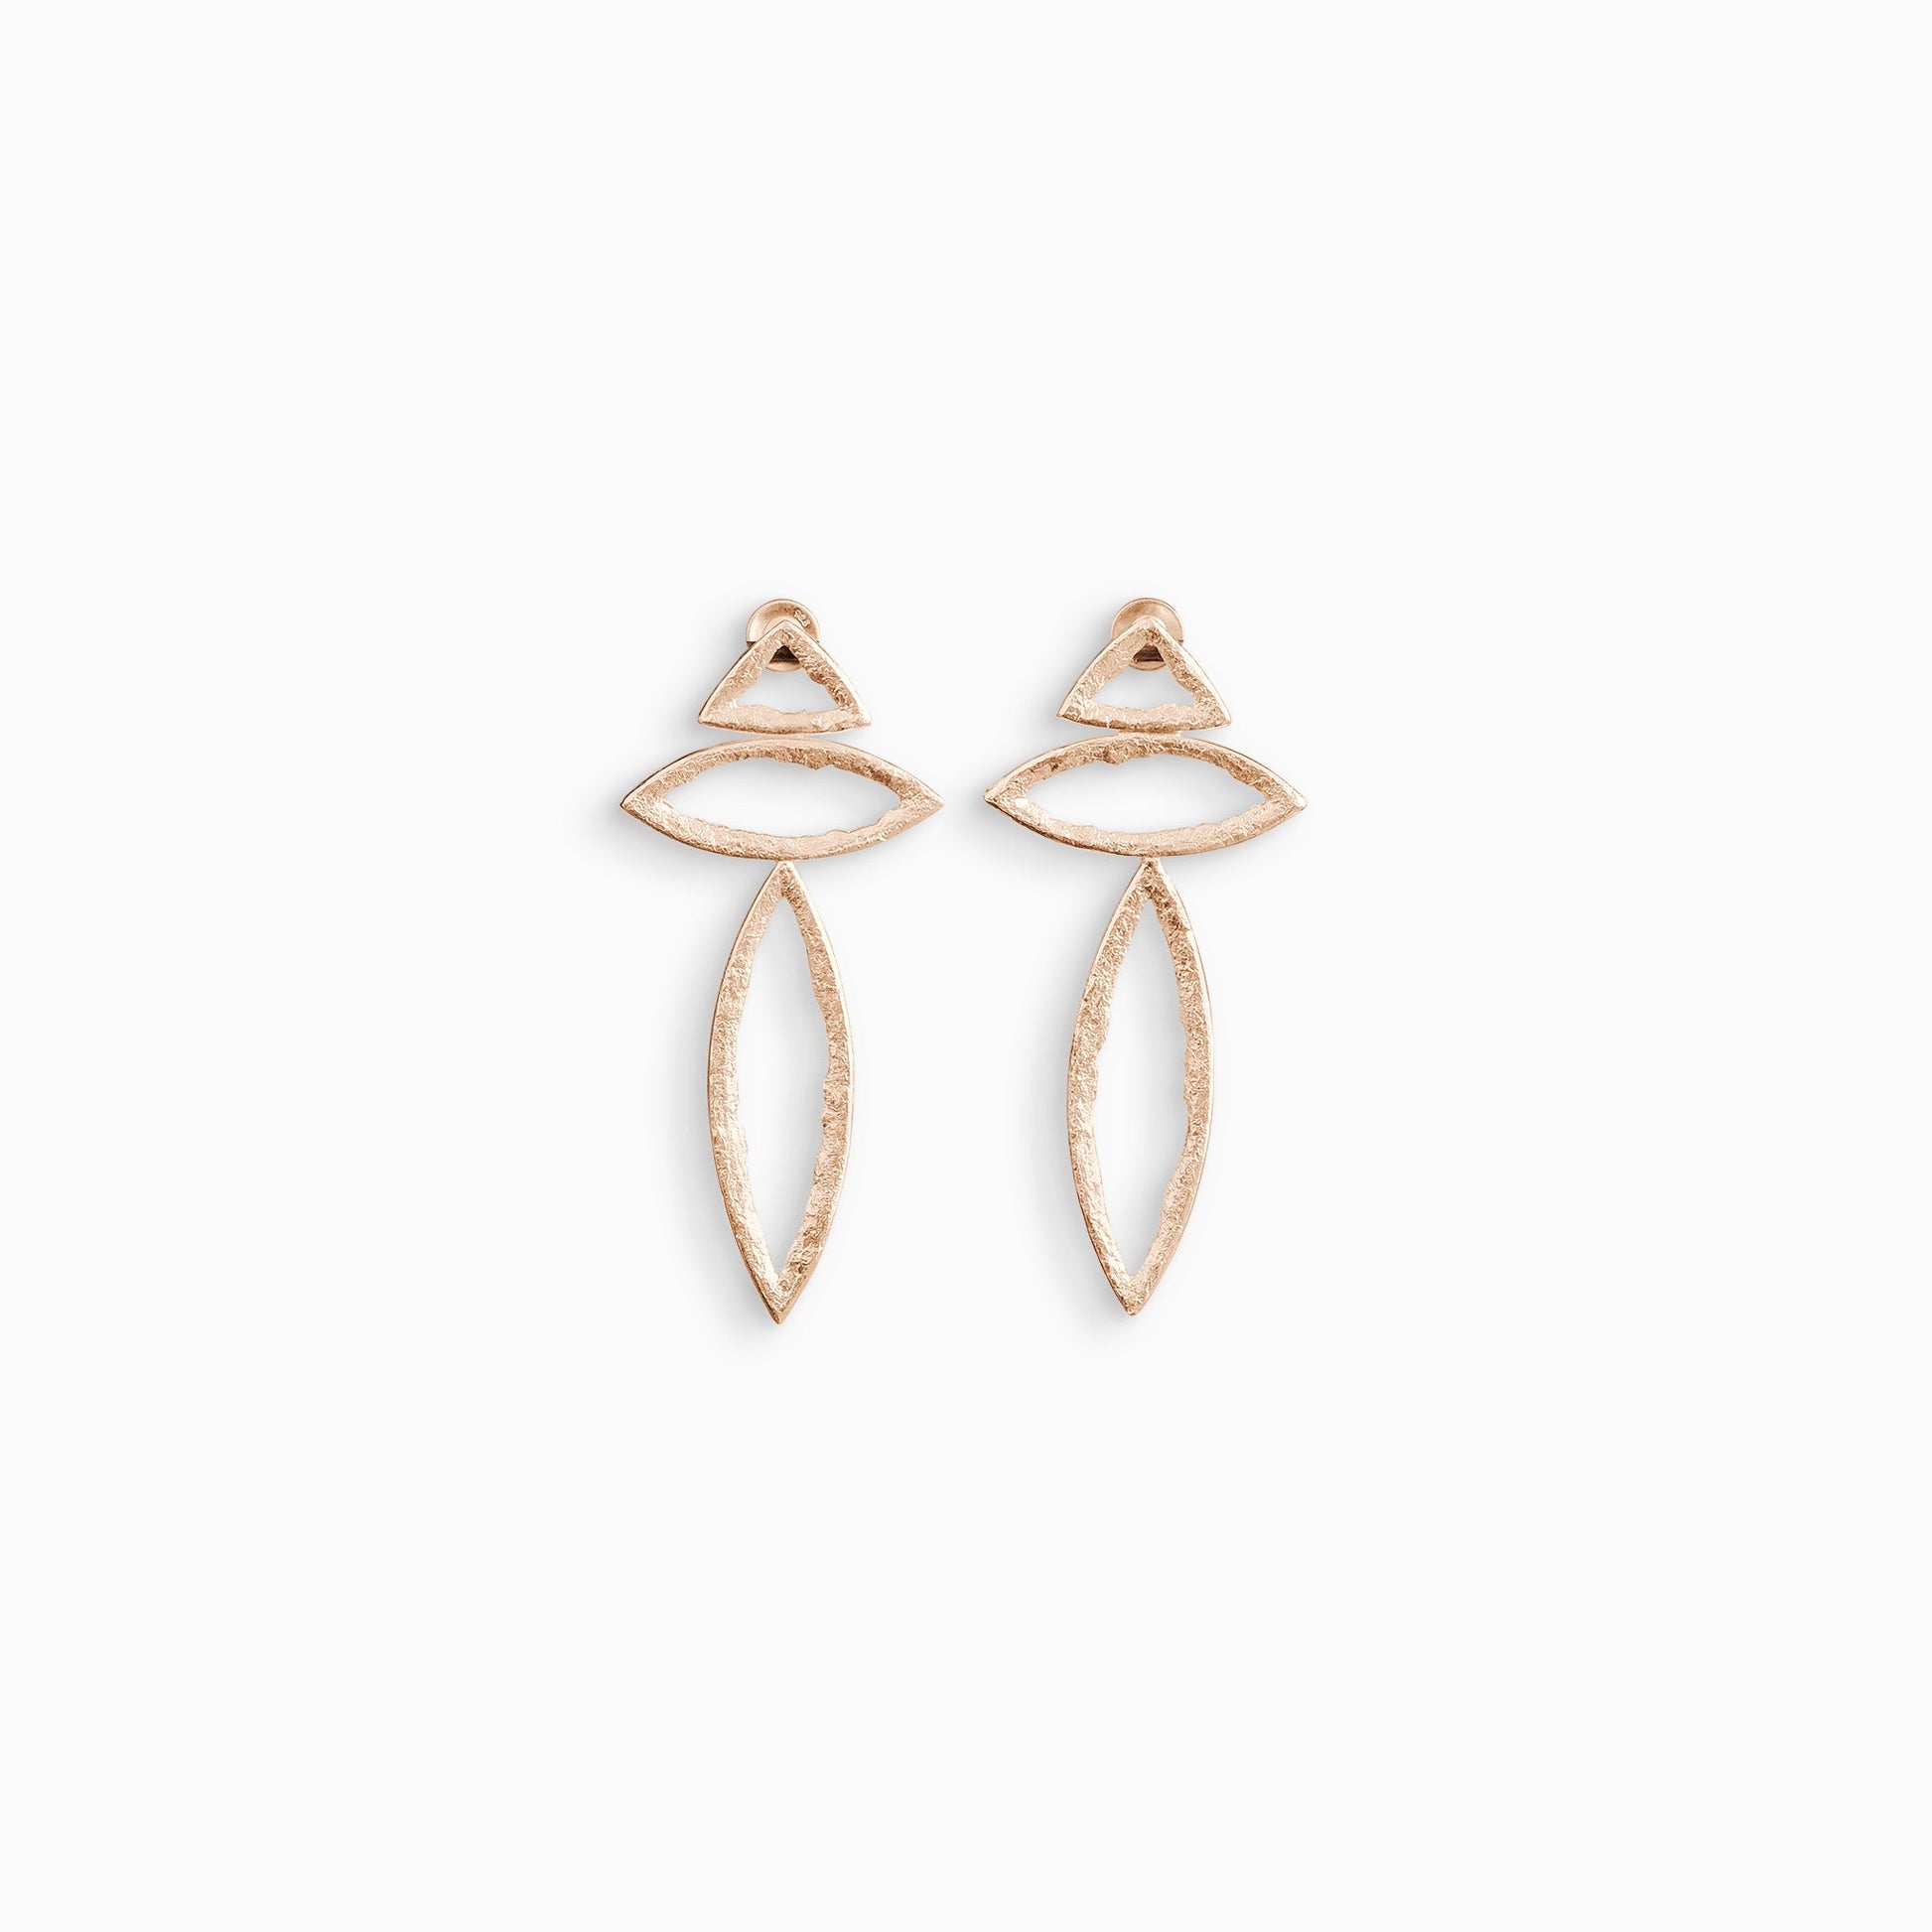 A pair of 18ct Fairtrade rose gold drop earrings with a stud ear fitting. A small triangular shape connects to a small lozenge shape to a larger lozenge shape to form a line. These open strongly textured shapes have smooth outside edges and fragmented inside edges. 46mm x 26mm.